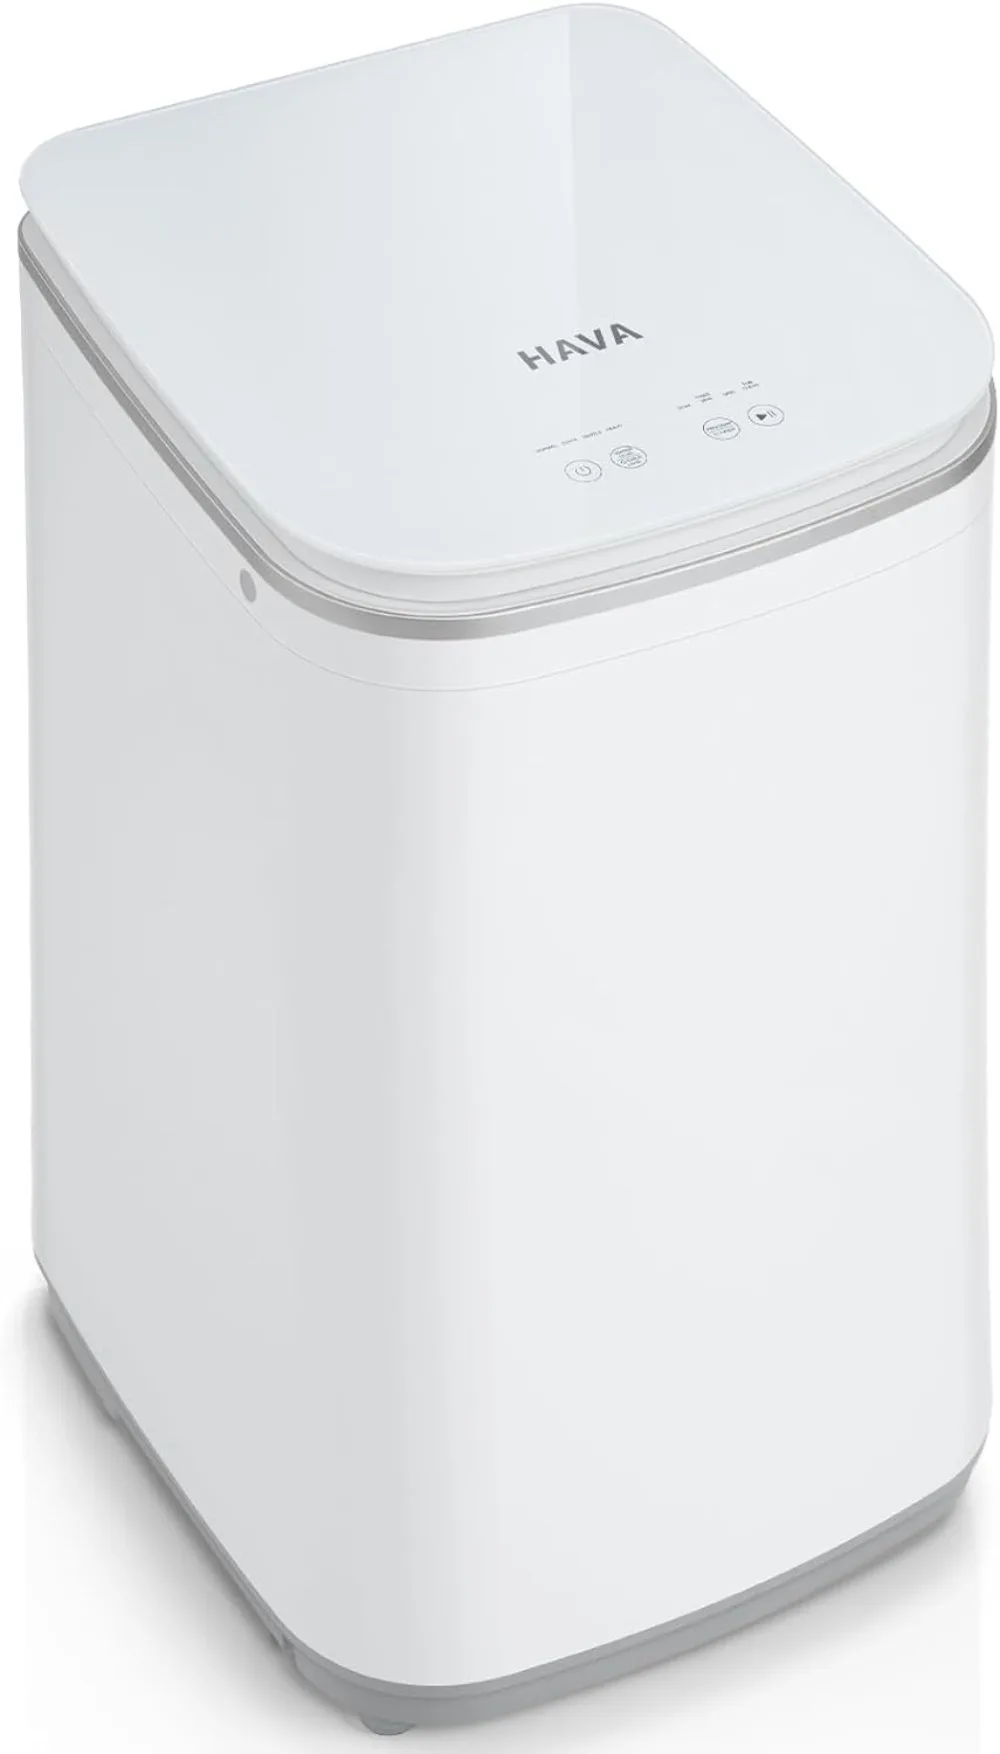 Able washer fully automatic washing machine small washer 0 8 cu ft capacity with 8 wash thumb200